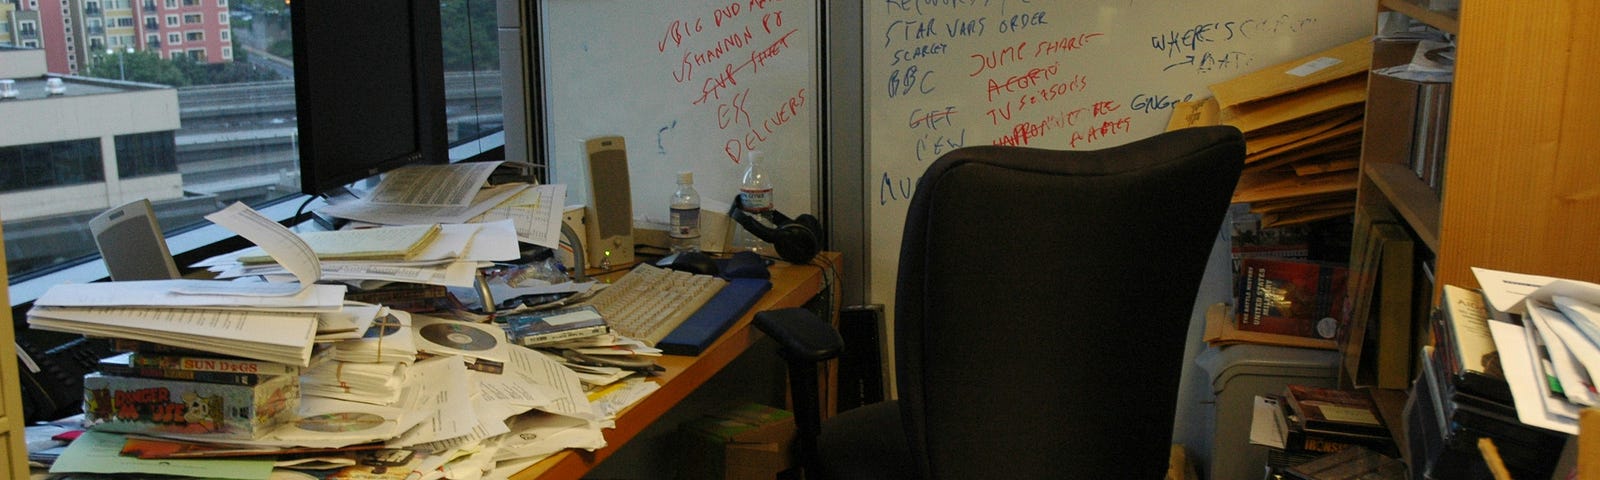 A very messy office